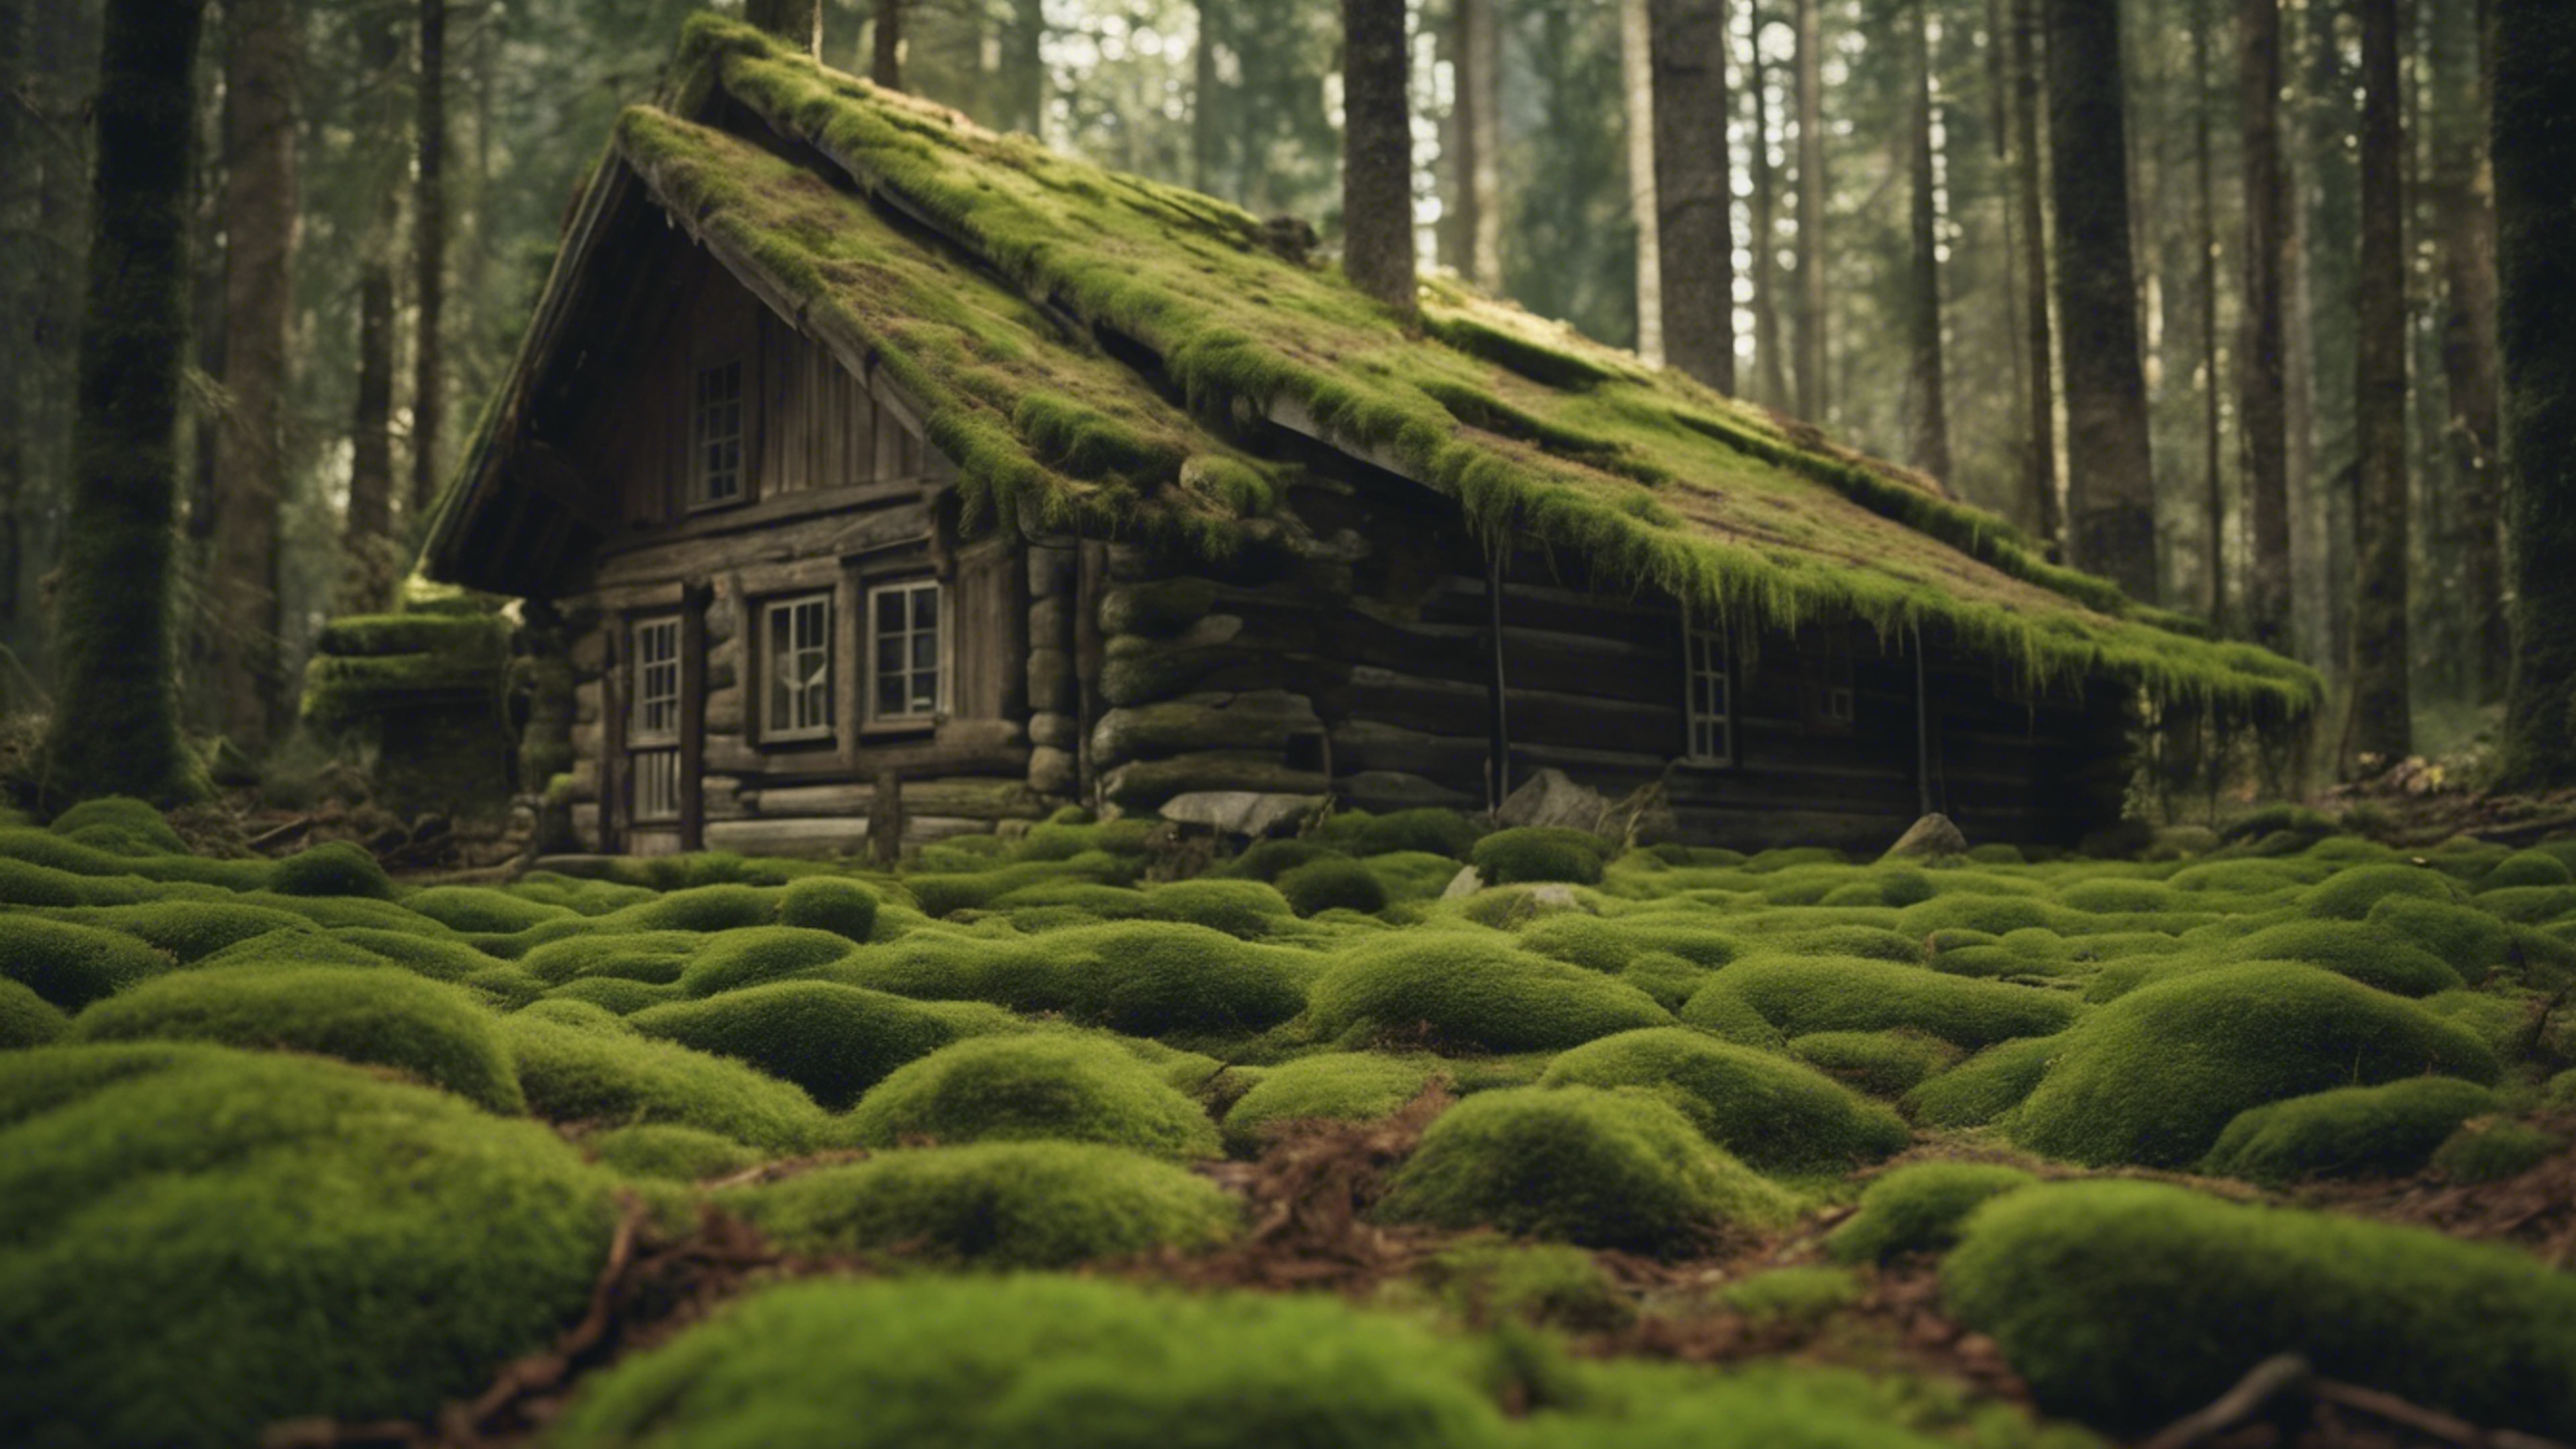 Ancient green moss covering a forgotten, brown wooden cabin in the depths of a forest. Wallpaper[10c6793935ca4f8ea684]